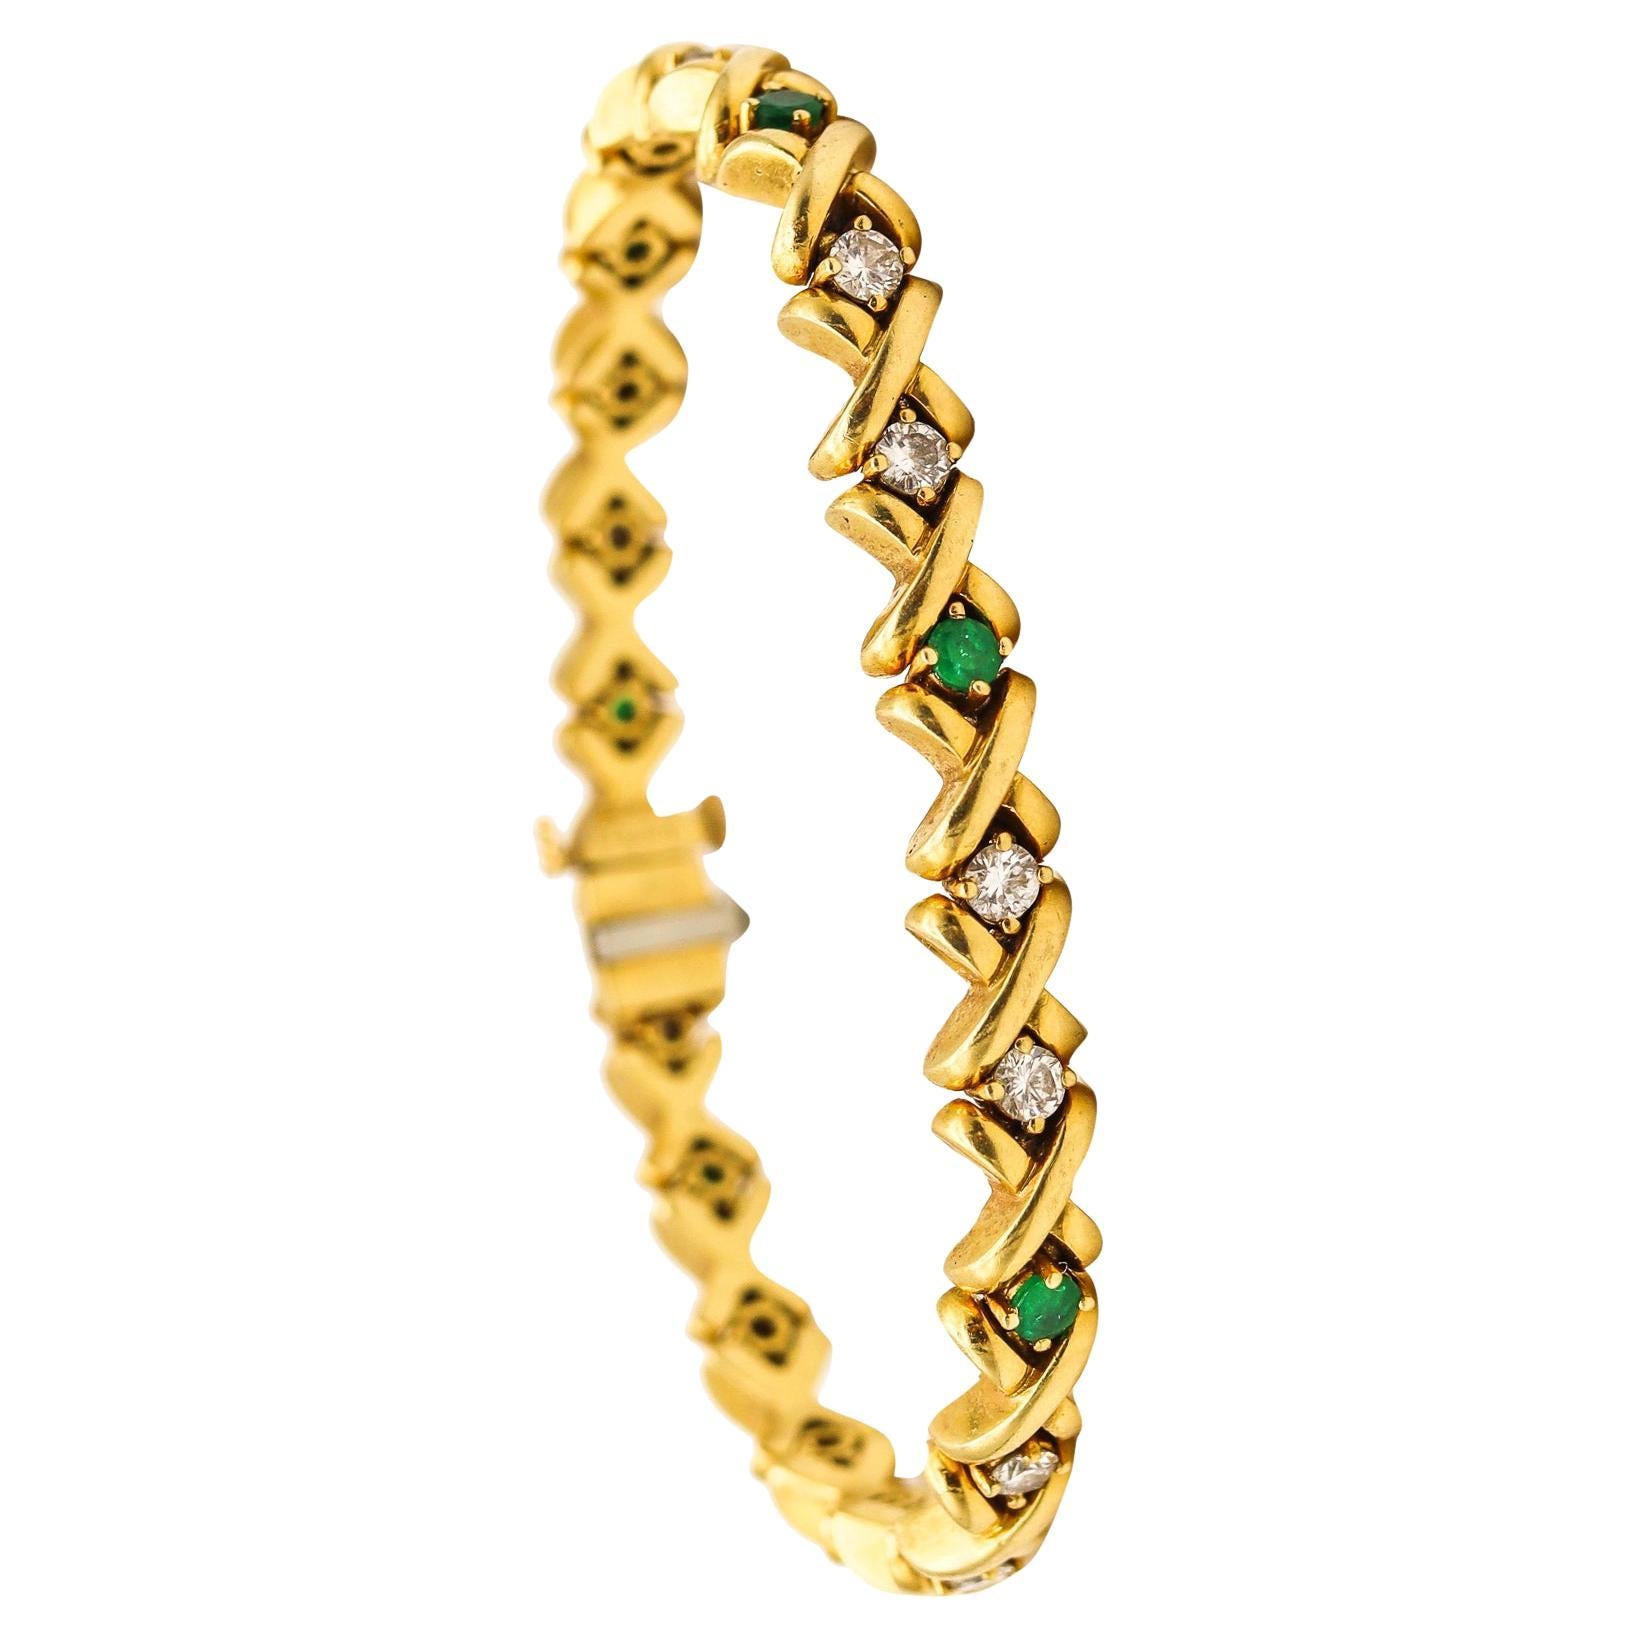 Tiffany & Co. Riviera Bracelet In 18Kt Gold With 2.45 Ctw In Diamonds & Emeralds For Sale